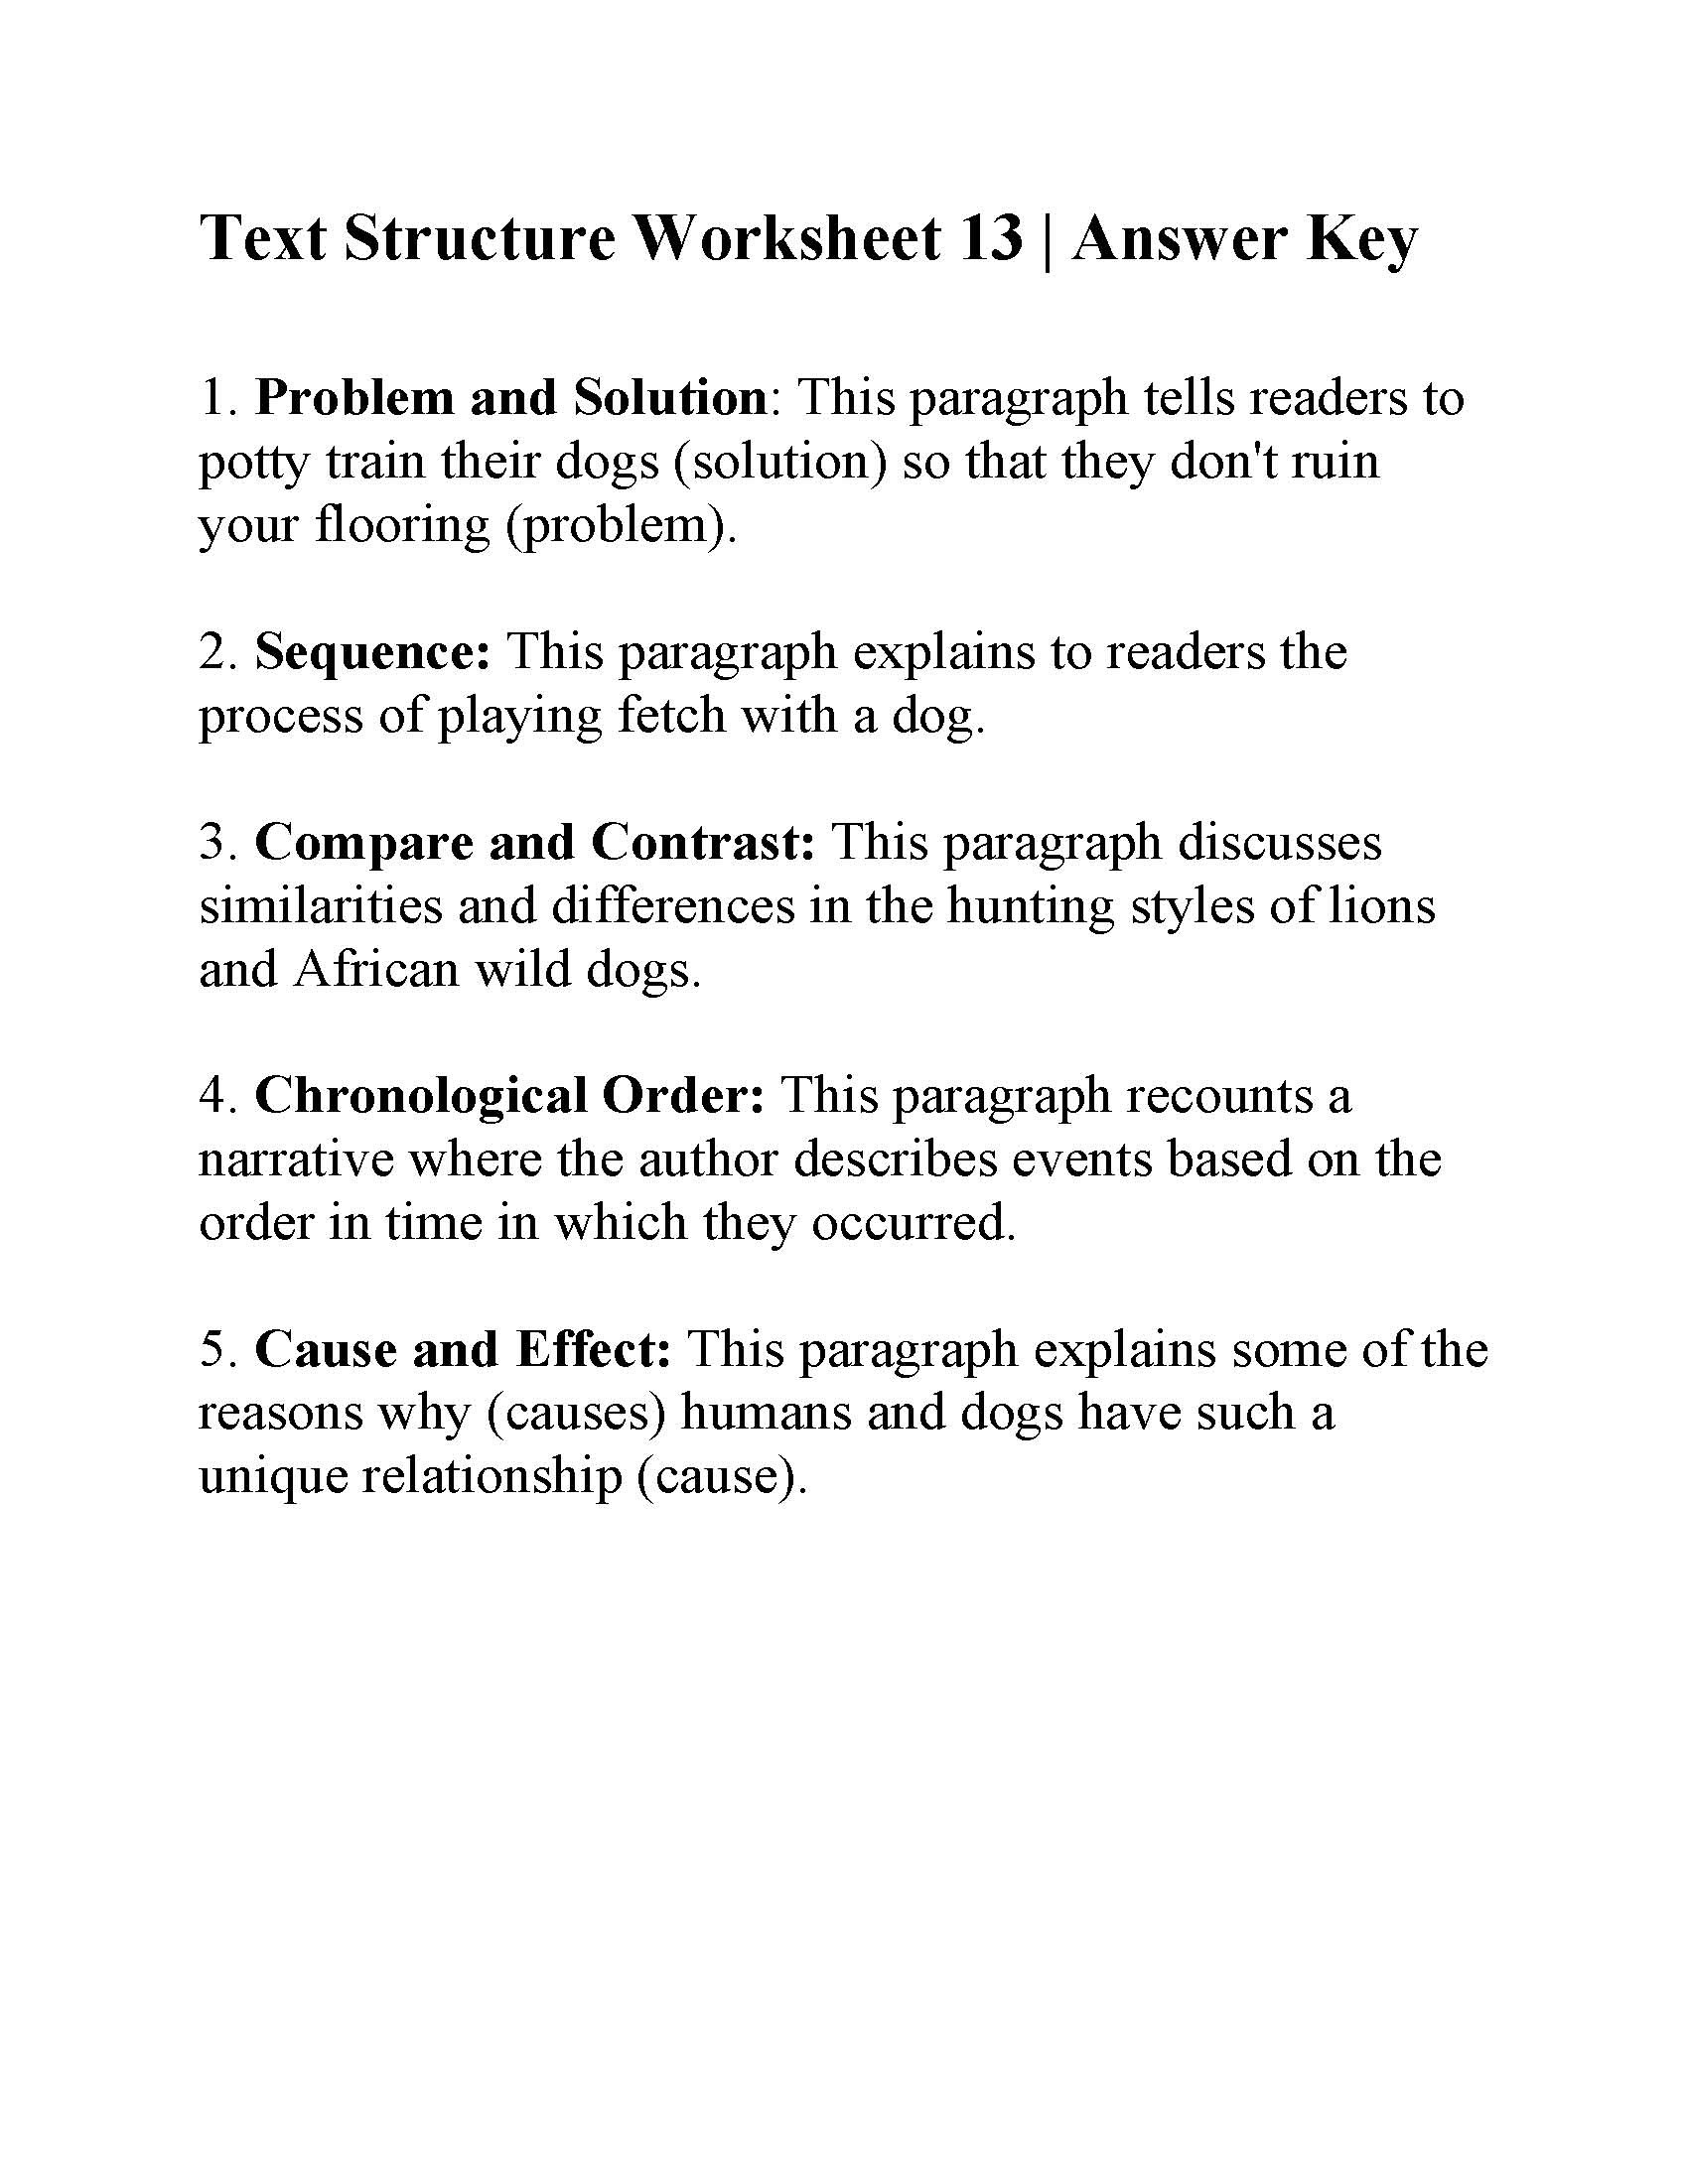 Text Structure Worksheet 13  Answers